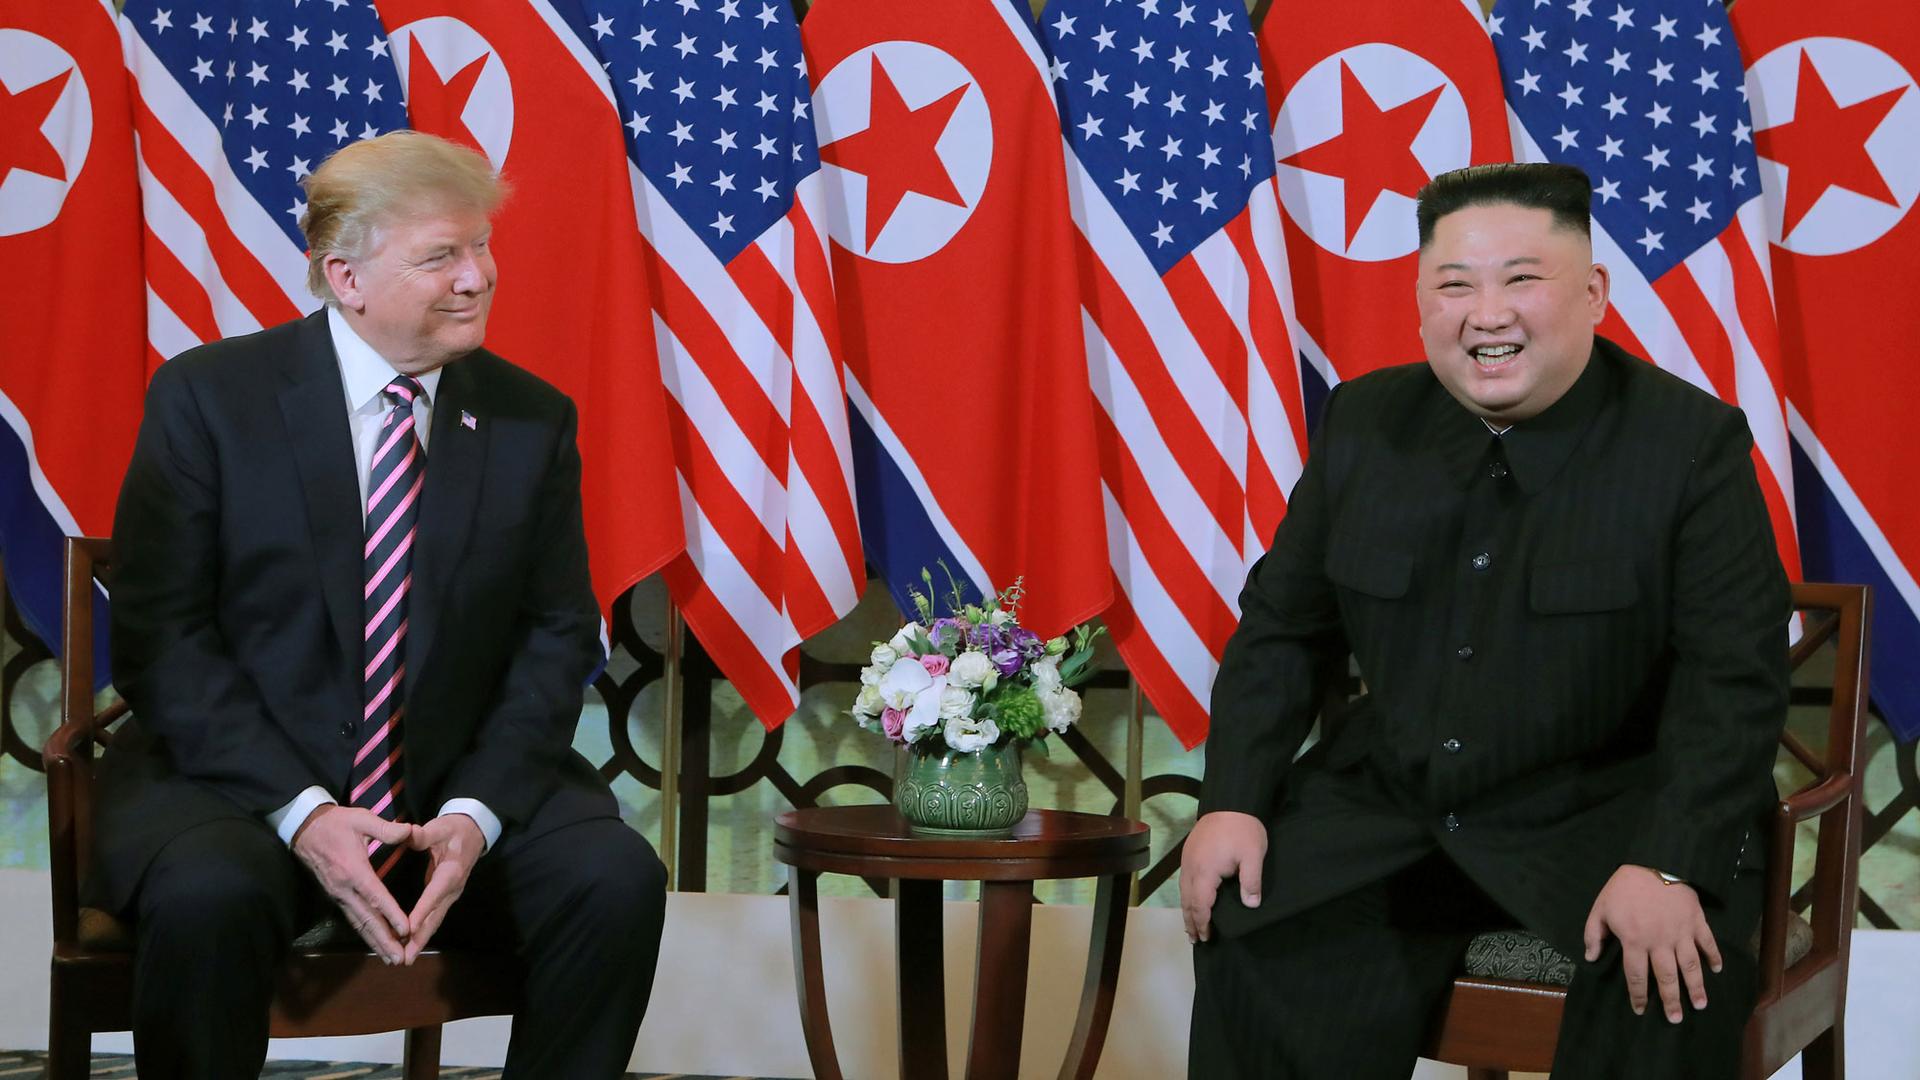 North Korea's leader Kim Jong-un and US President Donald Trump are shown sitting next two each other with US and North Korean flags behind them.